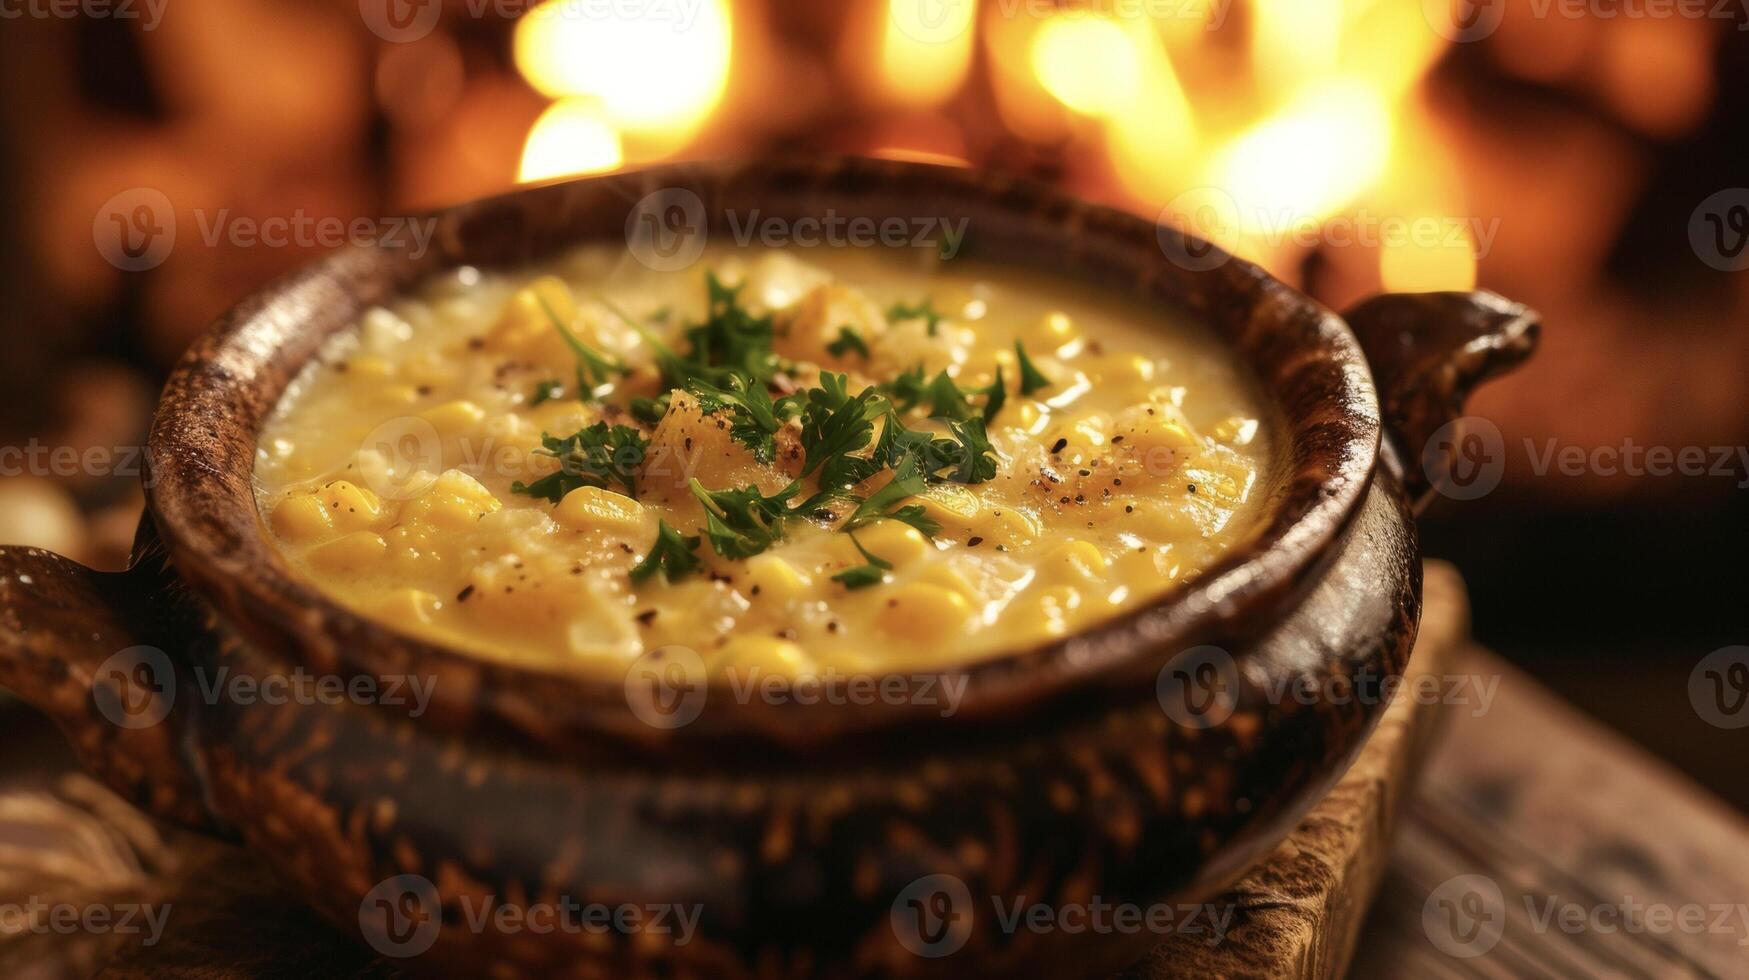 Indulge in the ultimate fireside treat a hearty bowl of corn chowder filled with sweet corn and served piping hot next to a glowing fire photo